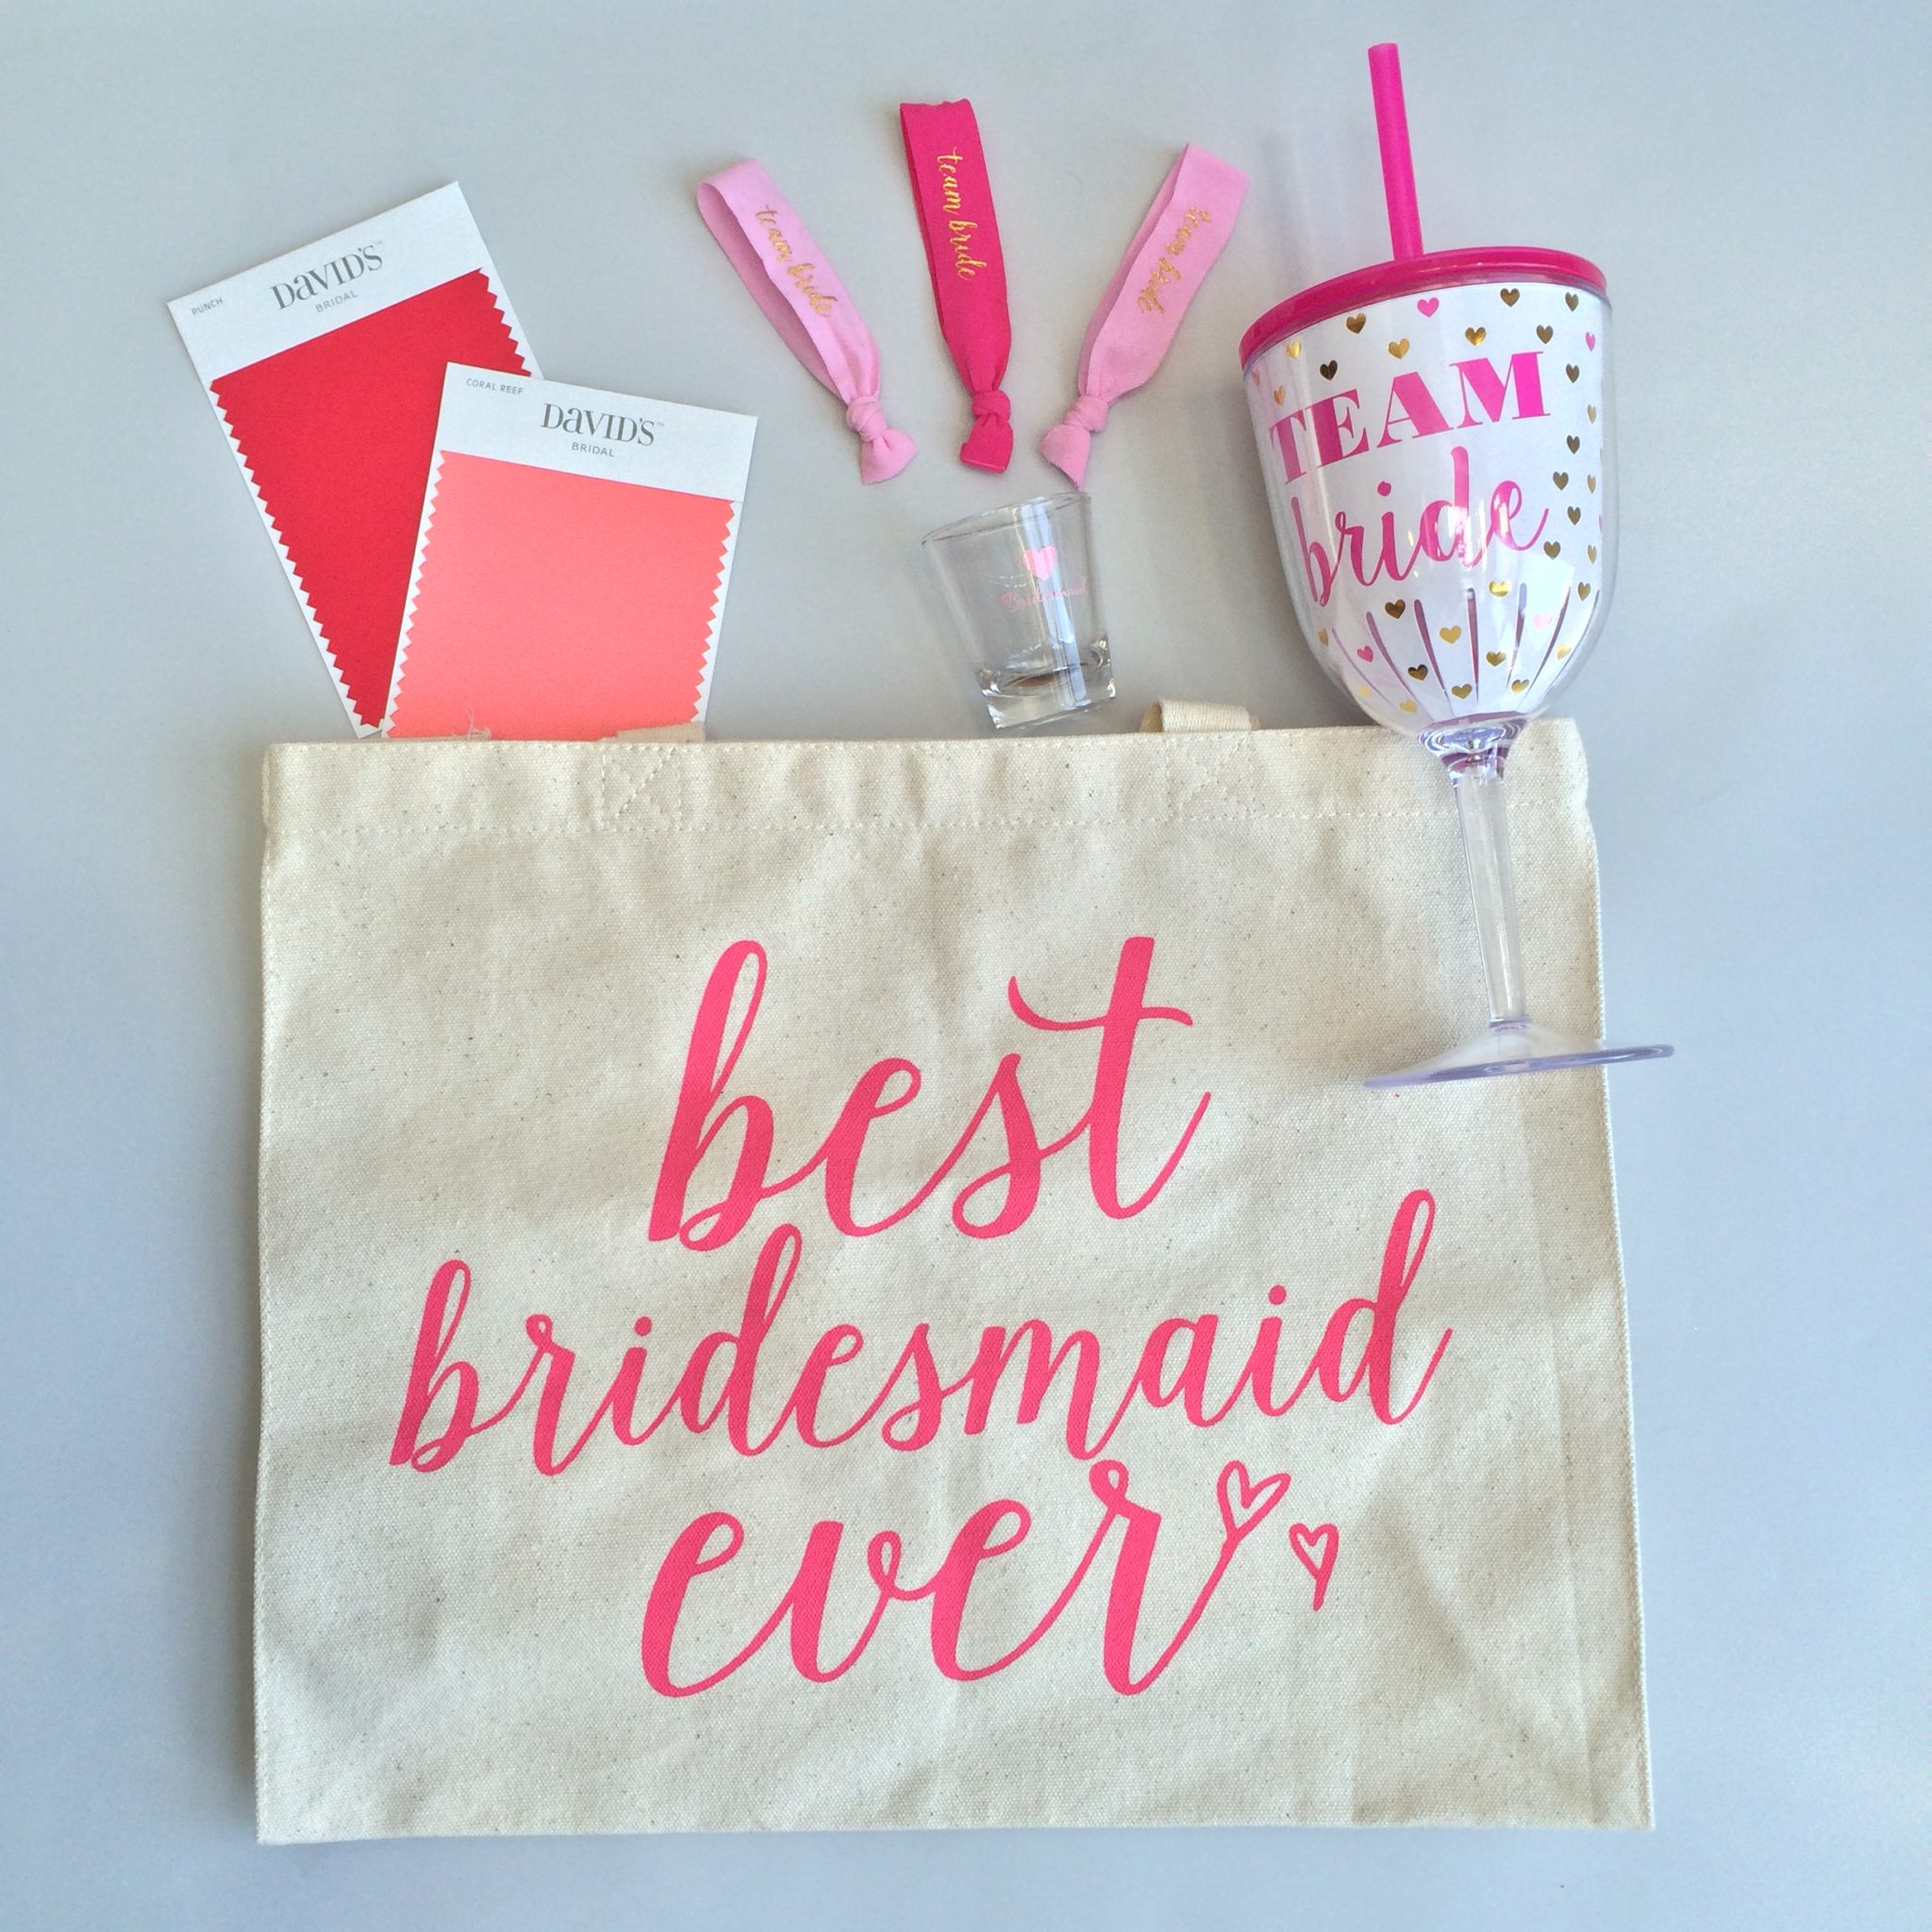 Best bridesmaid ever tote, team bride cup and other bridesmaid gifts